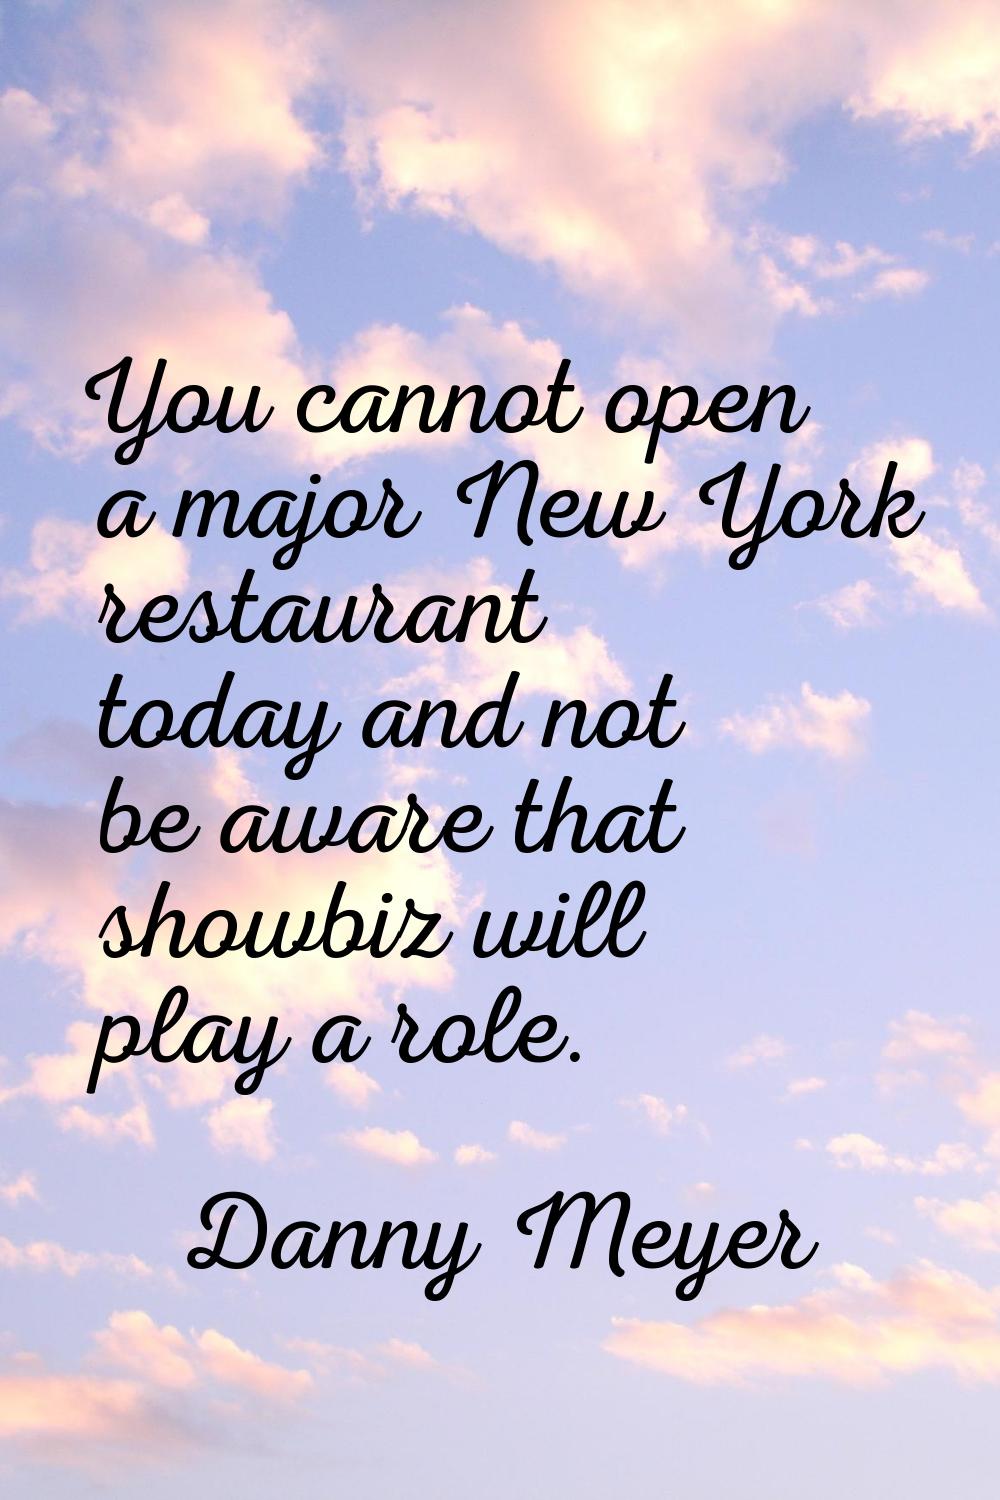 You cannot open a major New York restaurant today and not be aware that showbiz will play a role.